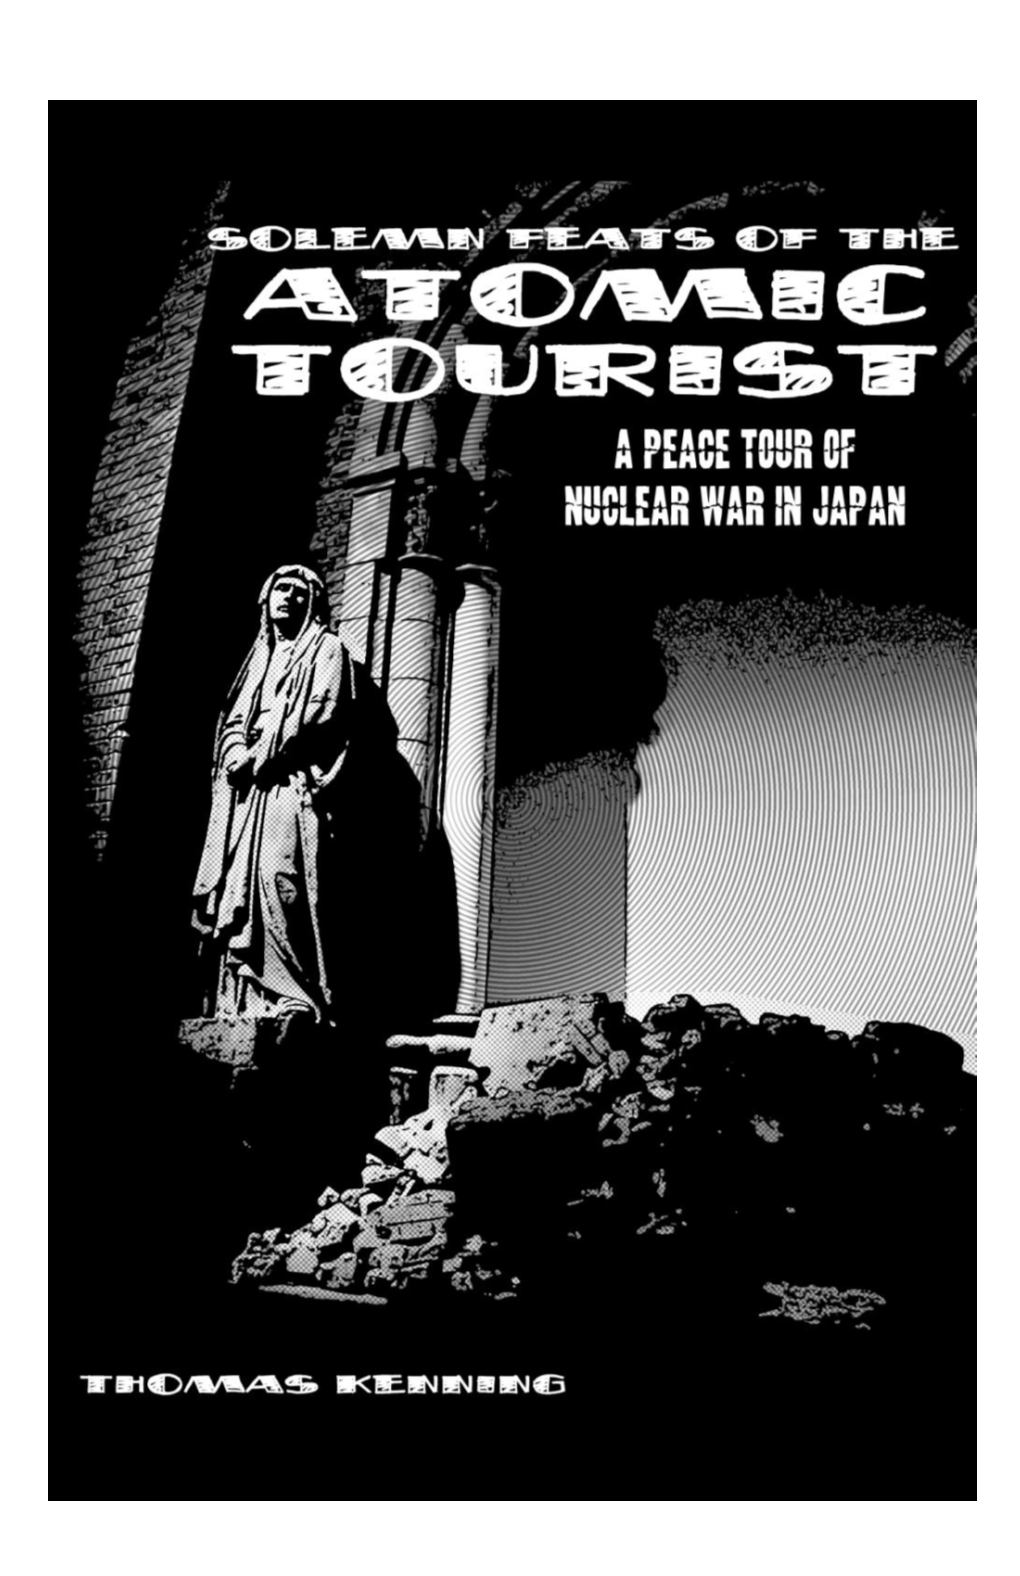 Solemn Feats of the Atomic Tourist: a Peace Tour of Nuclear War in Japan